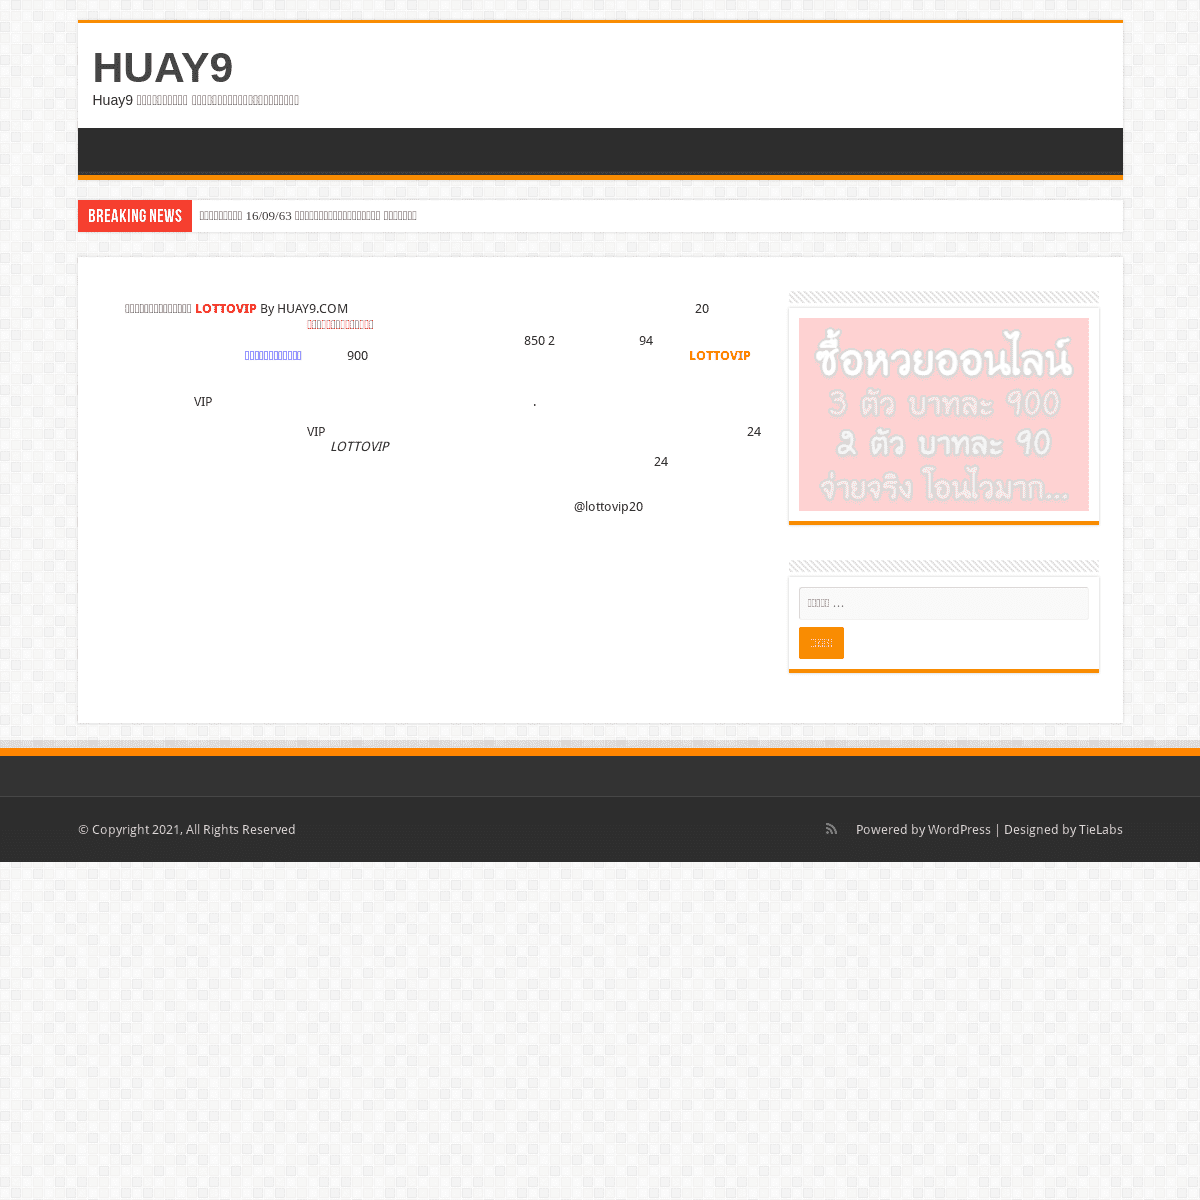 A complete backup of https://huay9.com